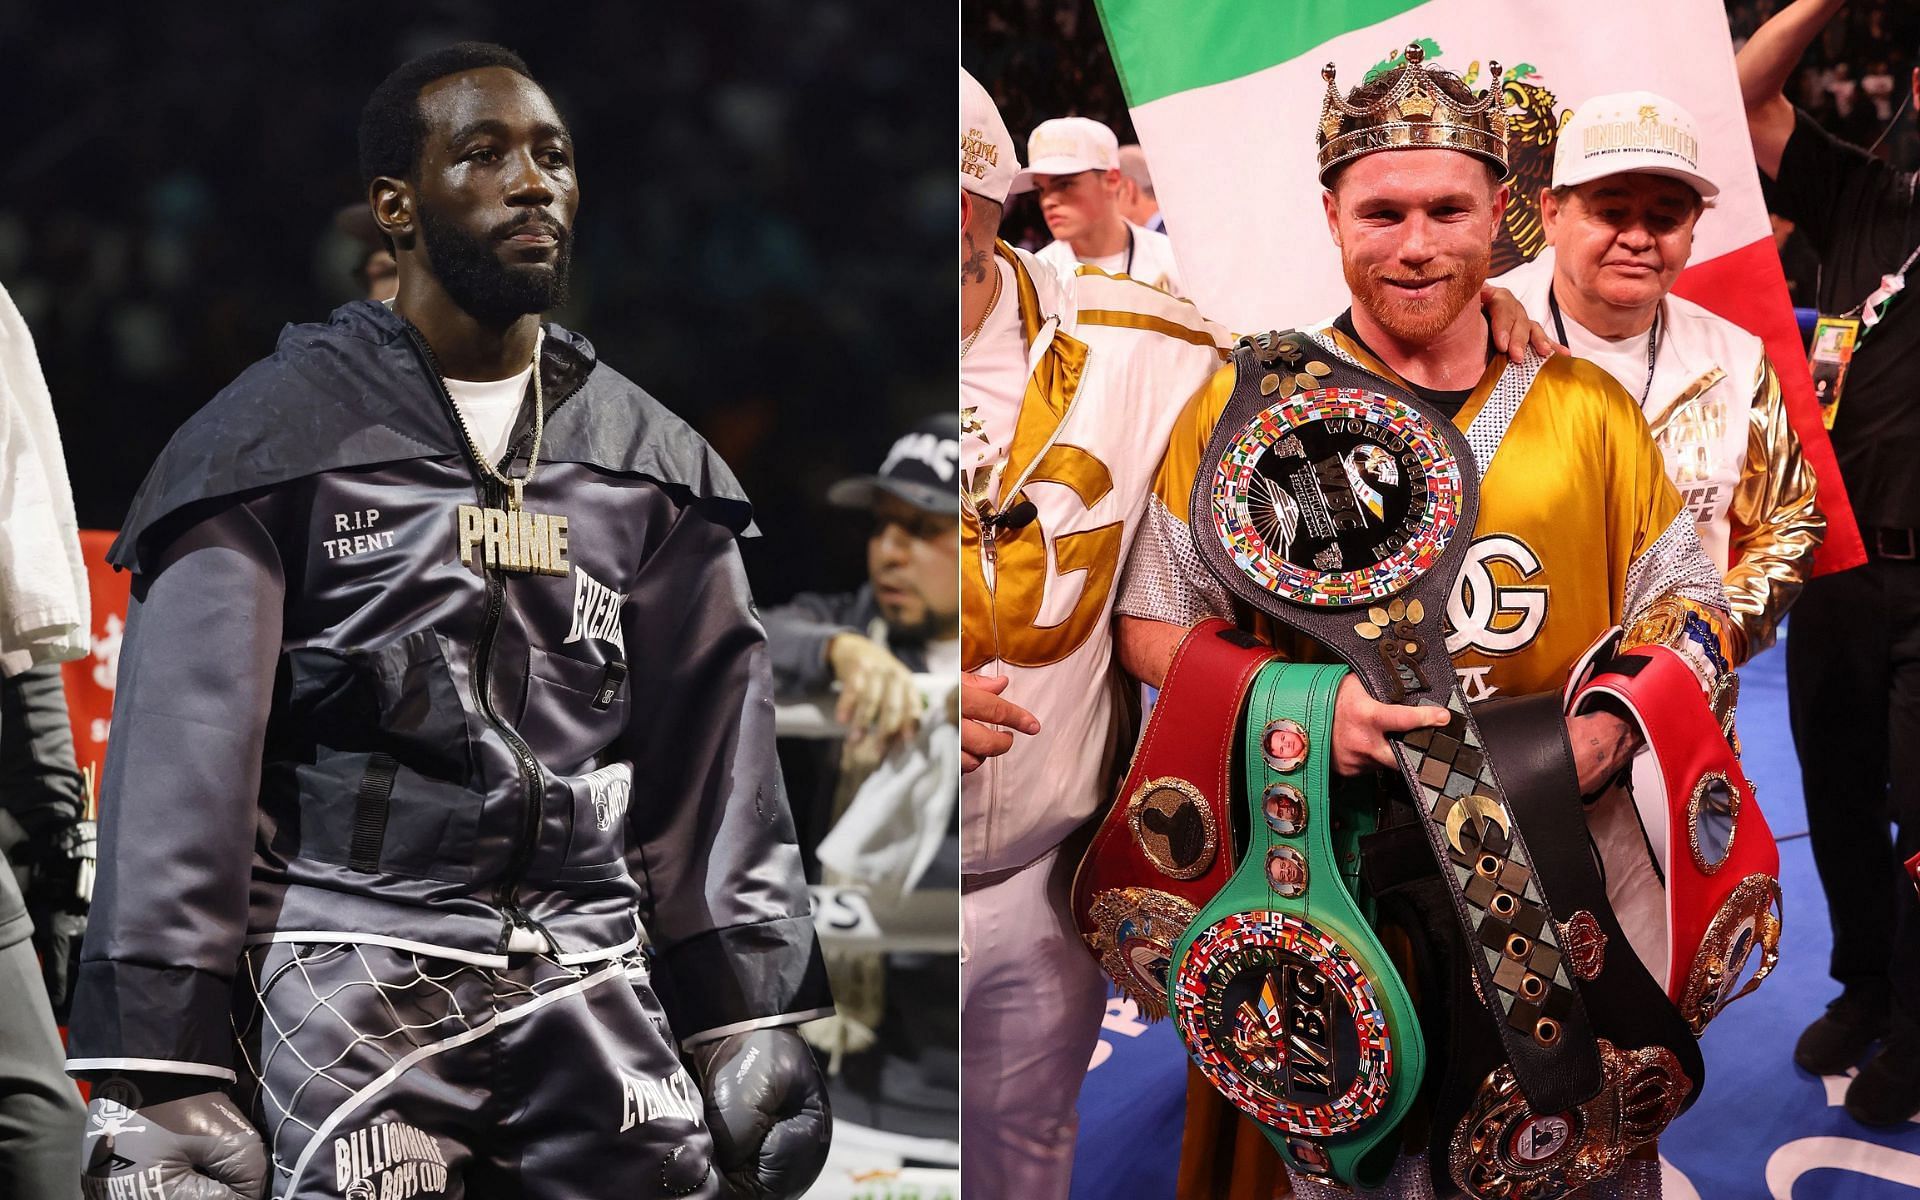 Terence Crawford and Canelo Alvarez could be on a collision course [Image Credit: Getty]